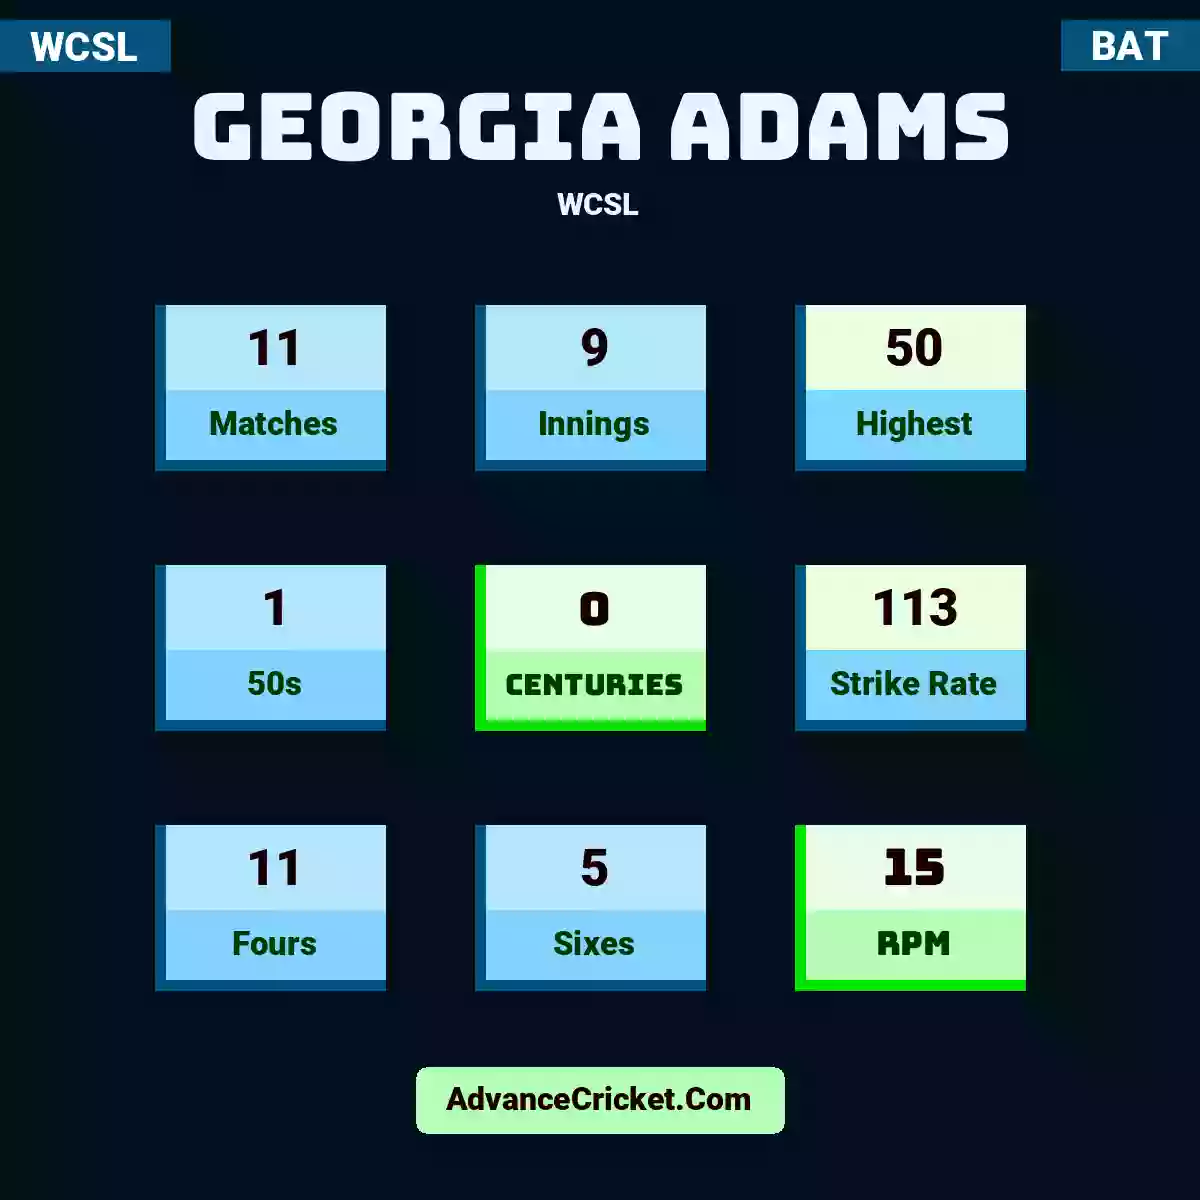 Georgia Adams WCSL , Georgia Adams played 11 matches, scored 50 runs as highest, 1 half-centuries, and 0 centuries, with a strike rate of 113. G.Adams hit 11 fours and 5 sixes, with an RPM of 15.